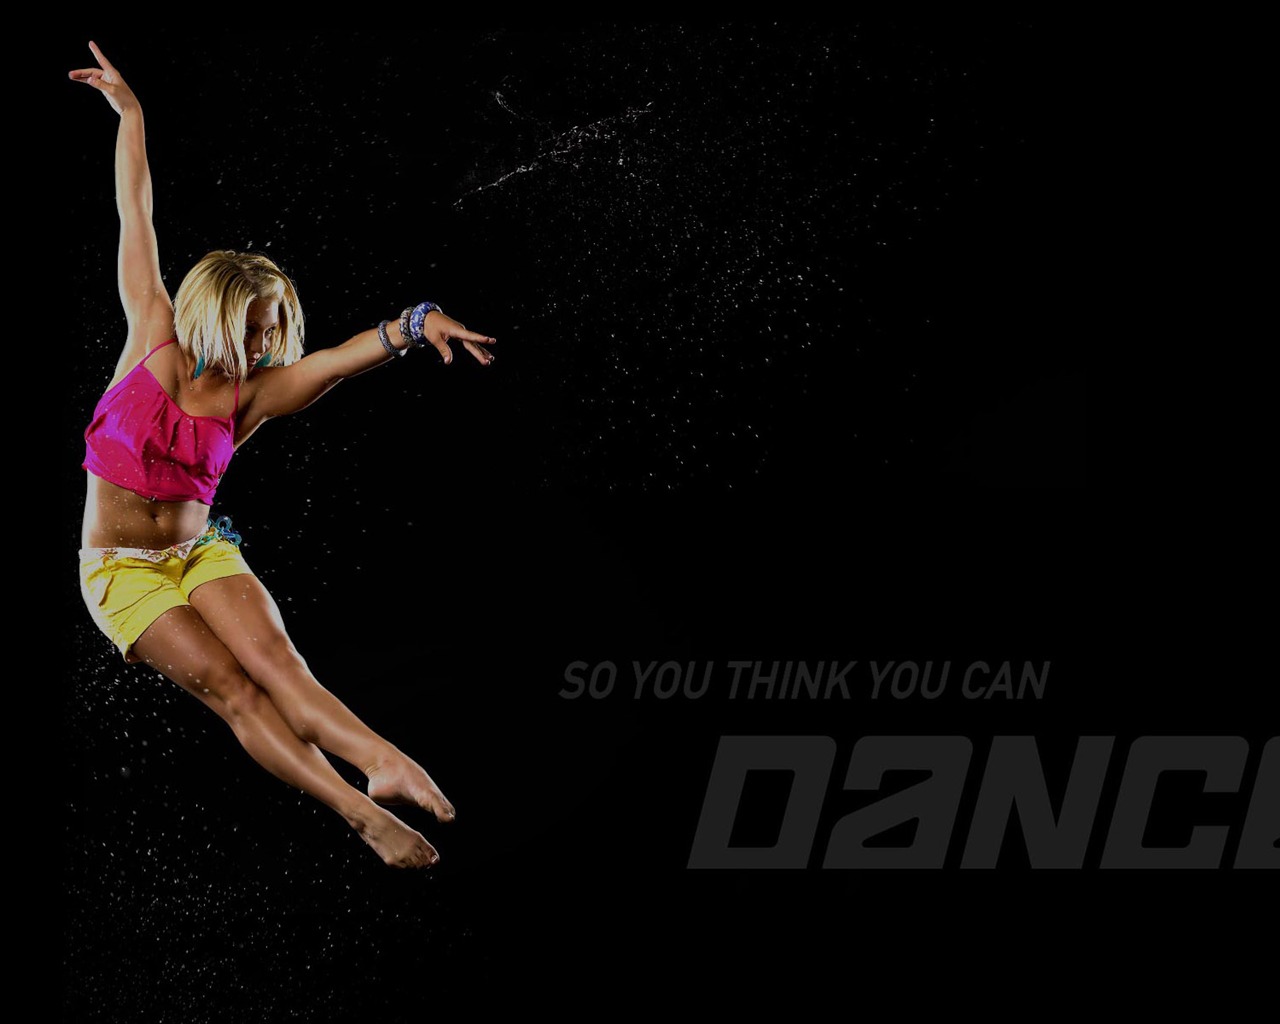 So You Think You Can Dance 舞林争霸 壁纸(一)5 - 1280x1024